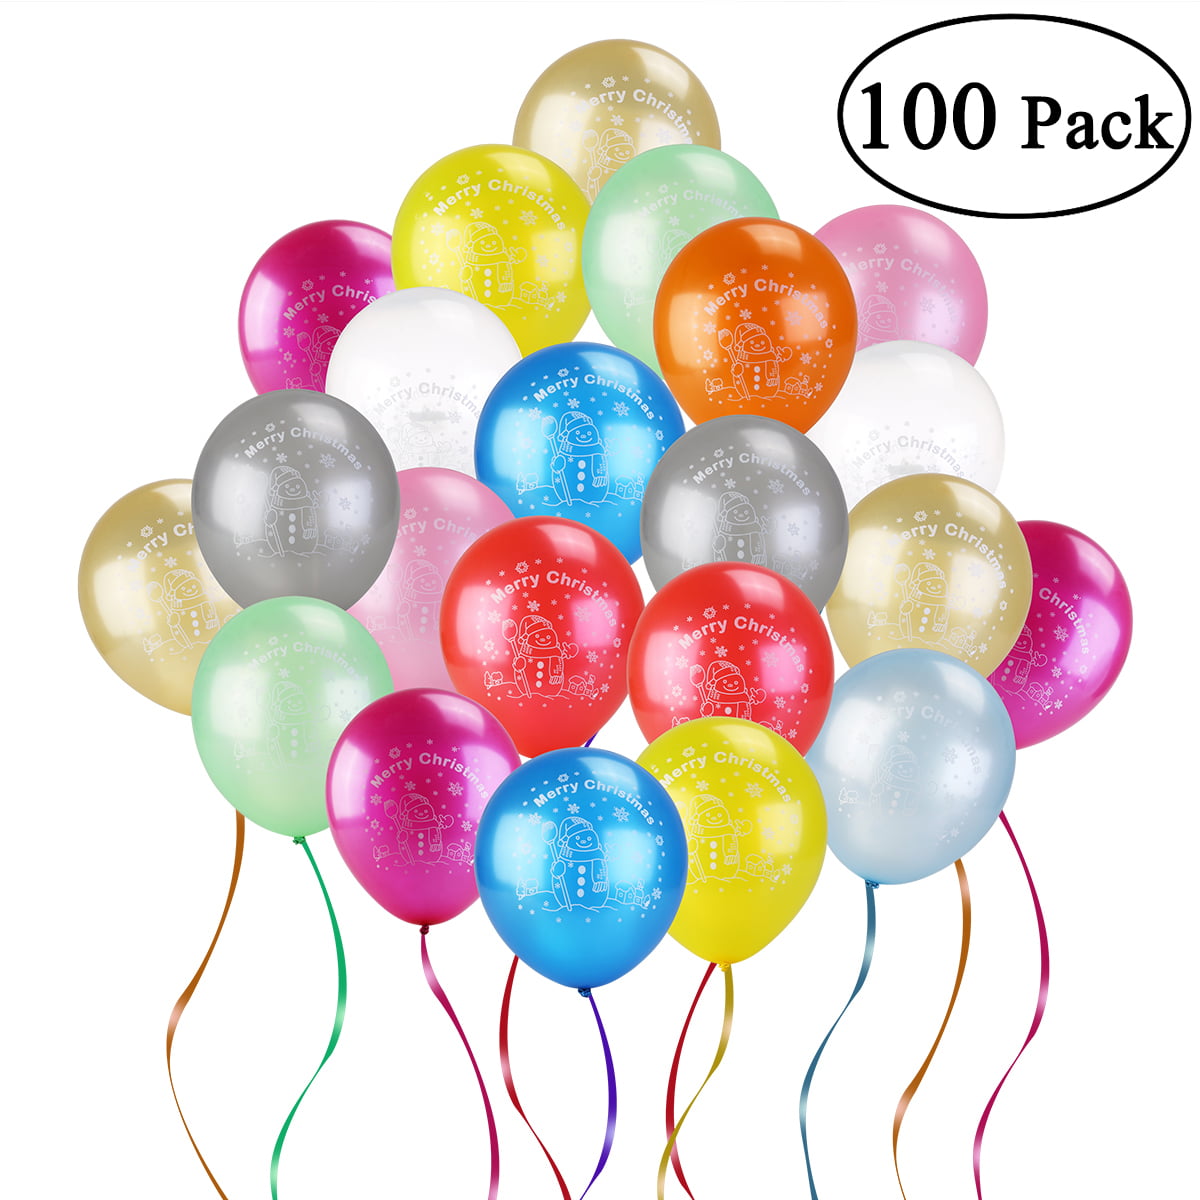 Random Color NUOLUX 12 Inch Assorted Bright Color Latex Balloons 100pcs